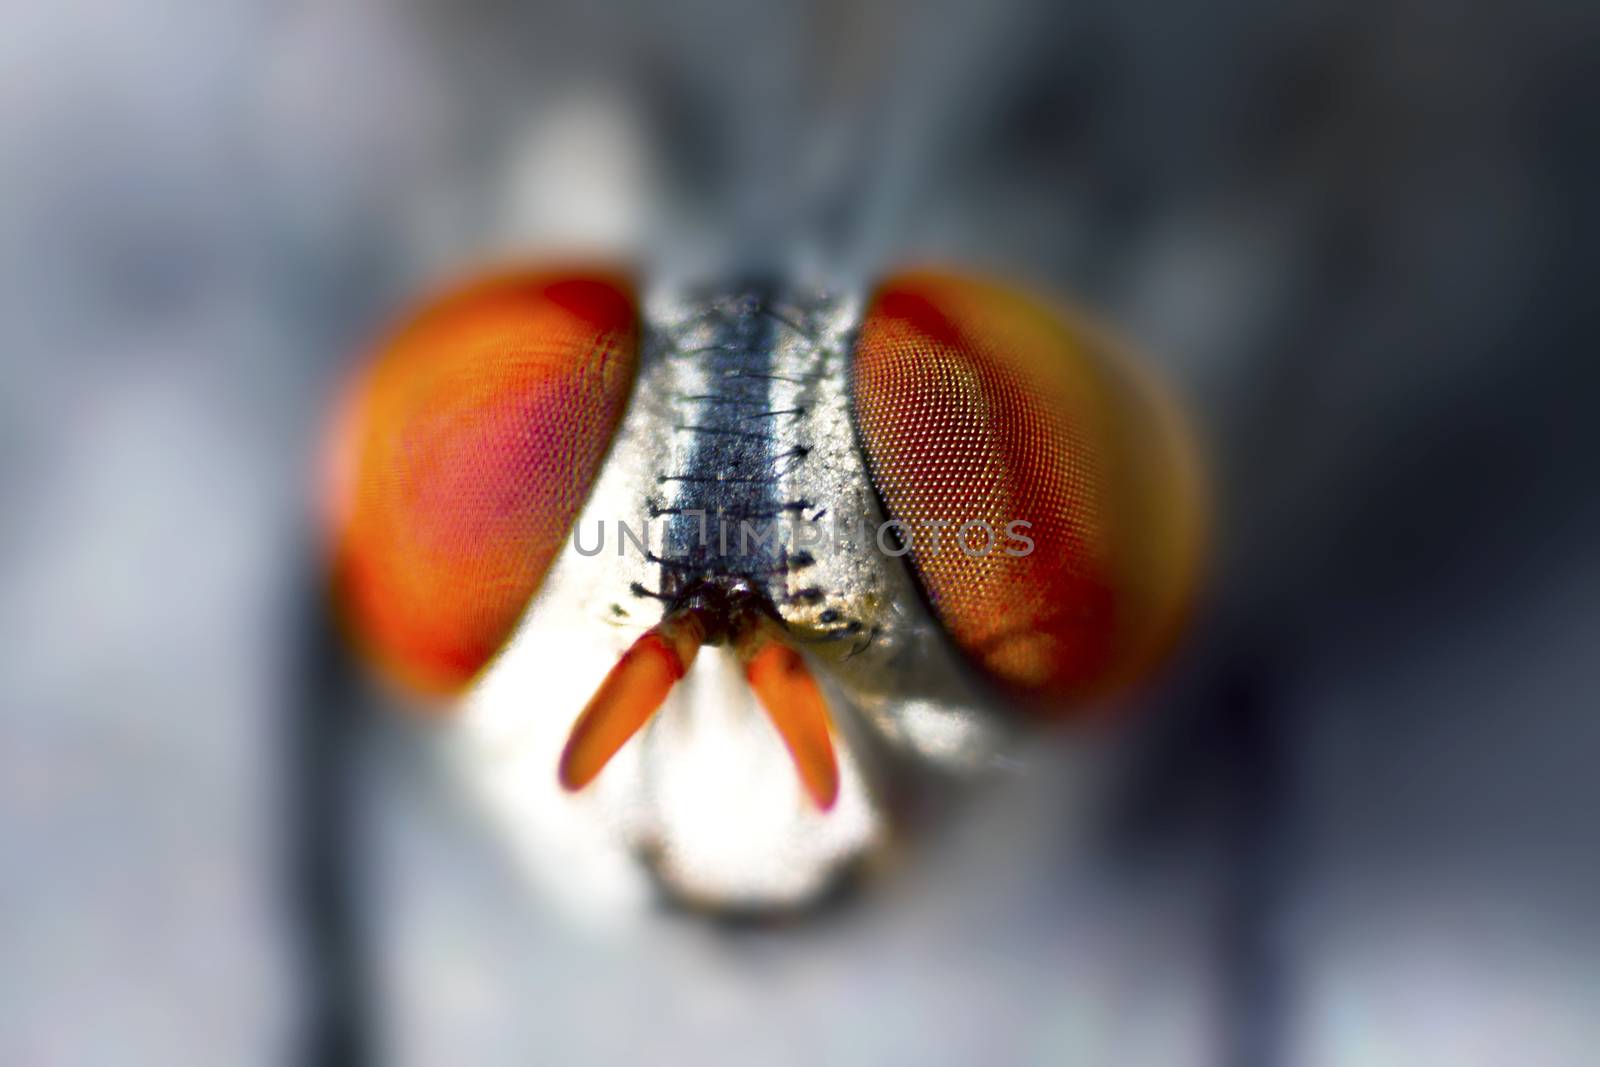 an extreme close up of a common house fly with red eyes in focus and background blurred